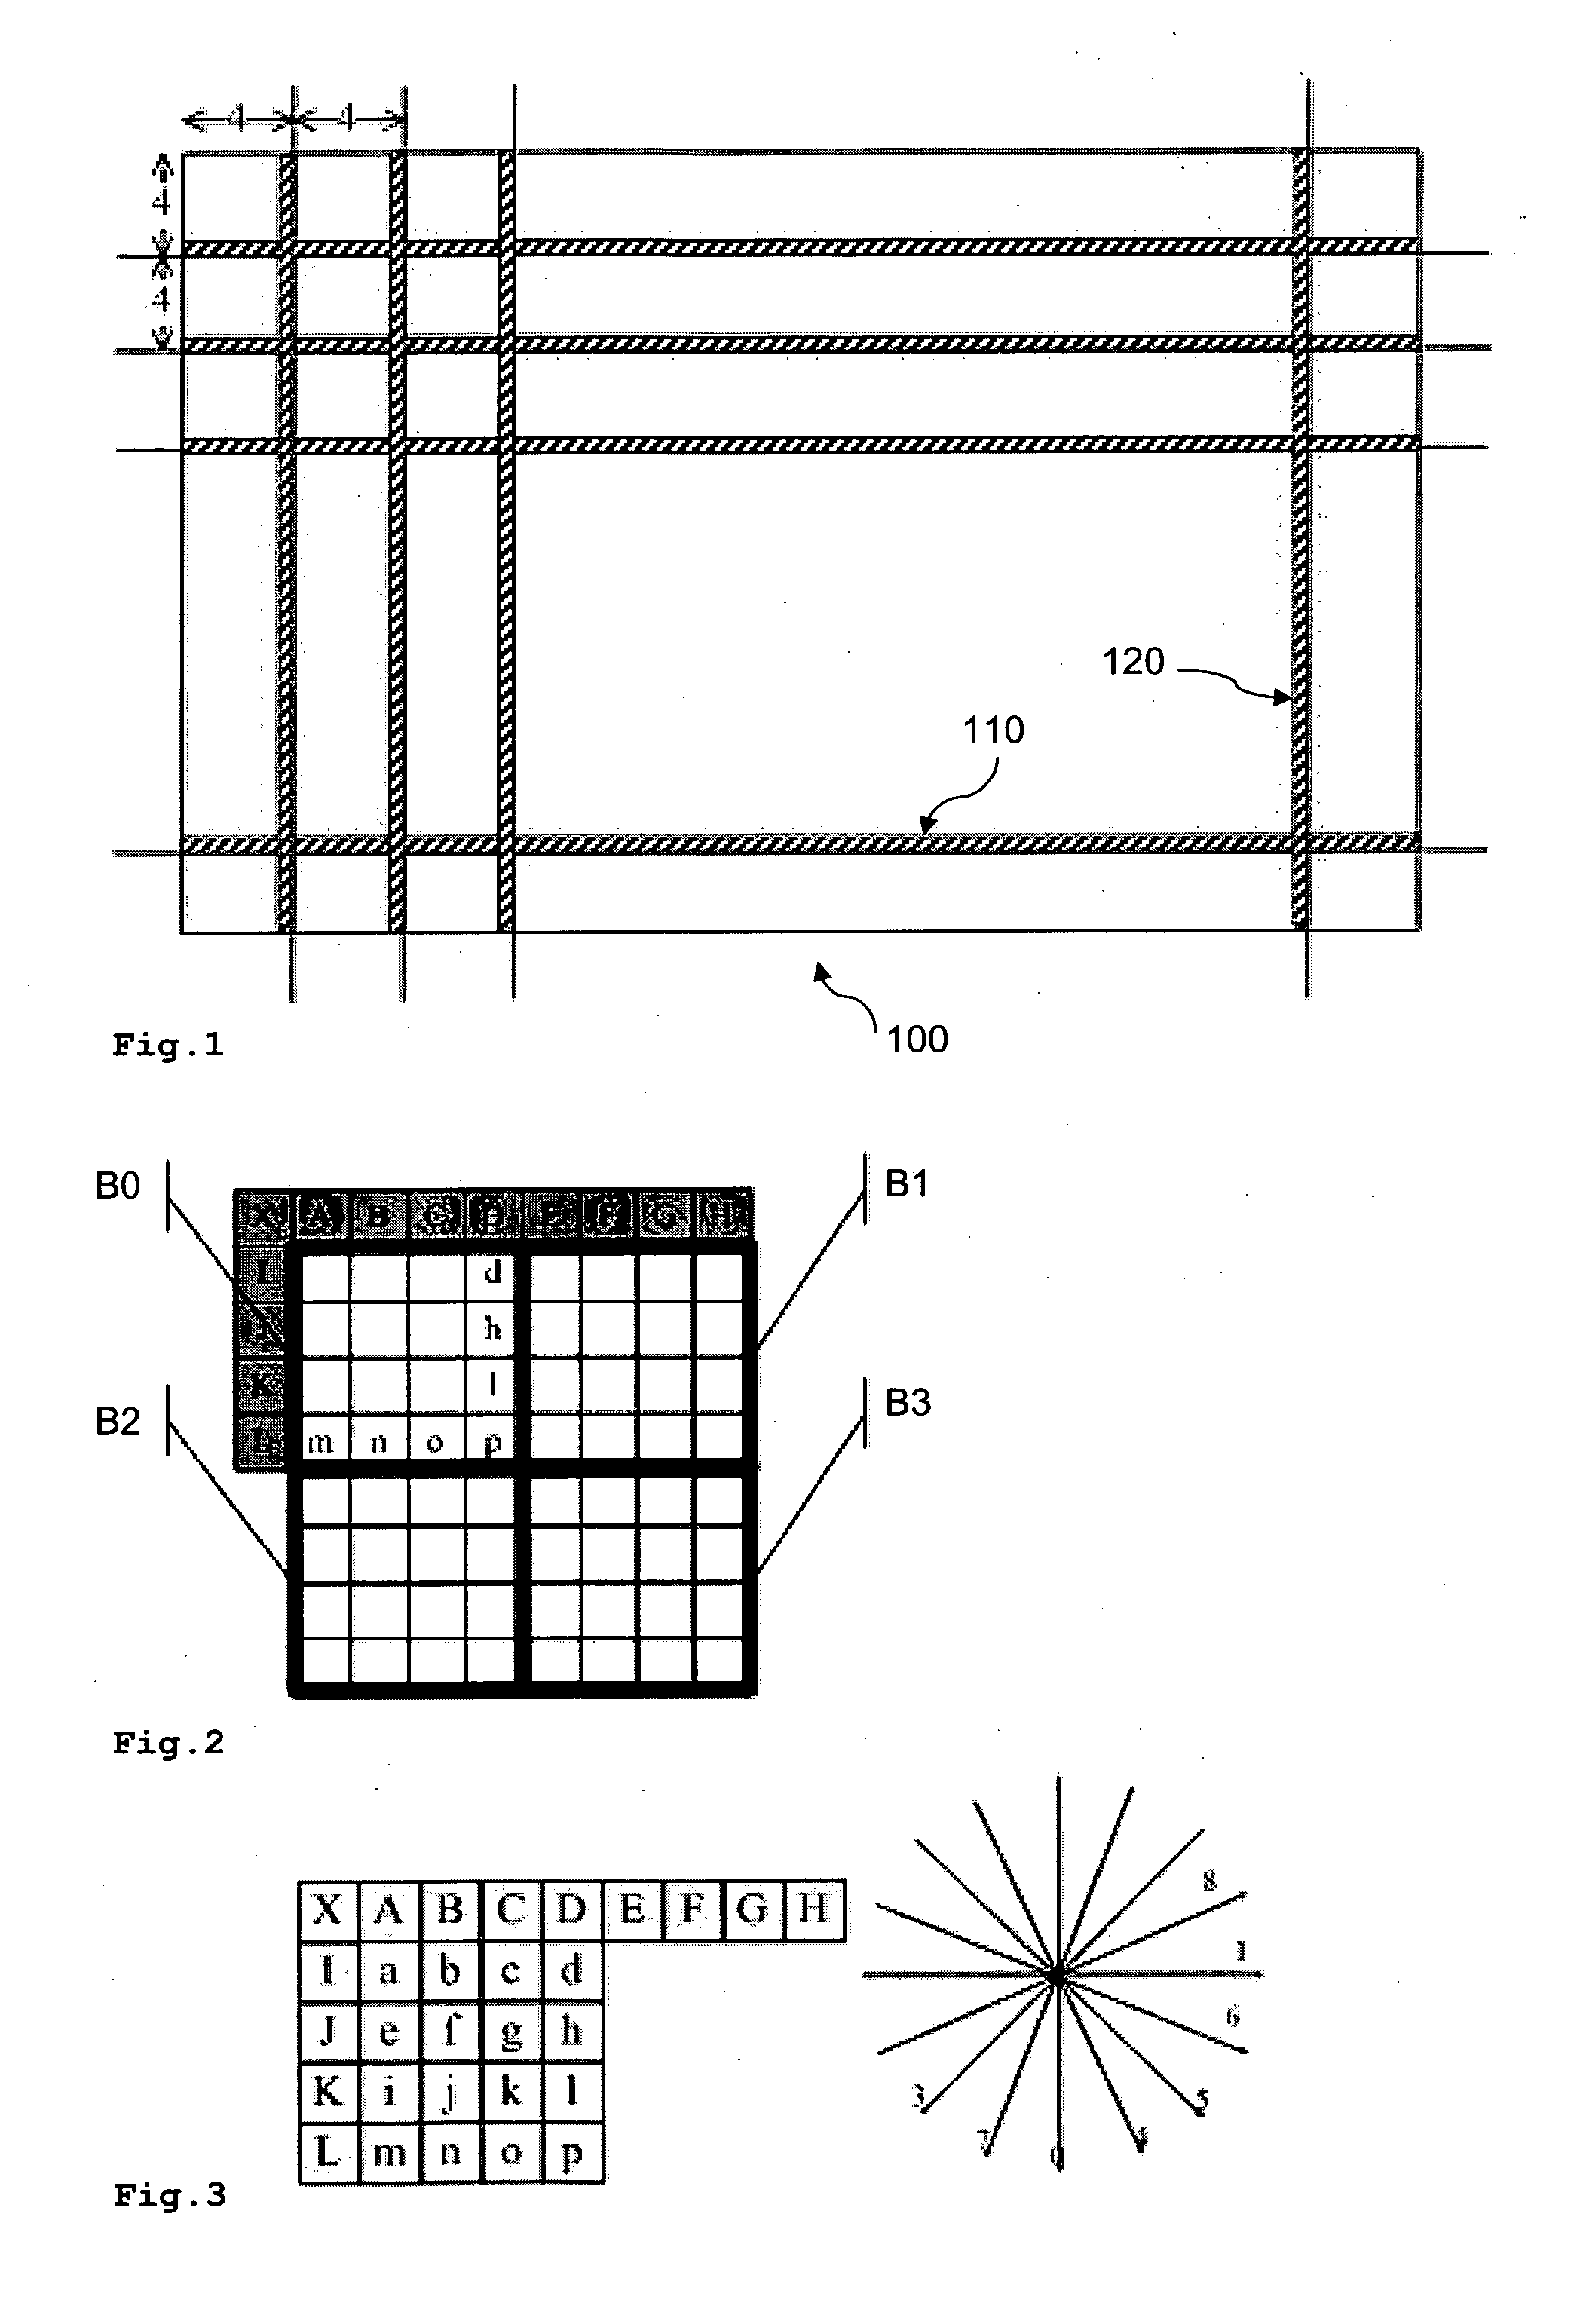 Method and apparatus for encoding/decoding image data